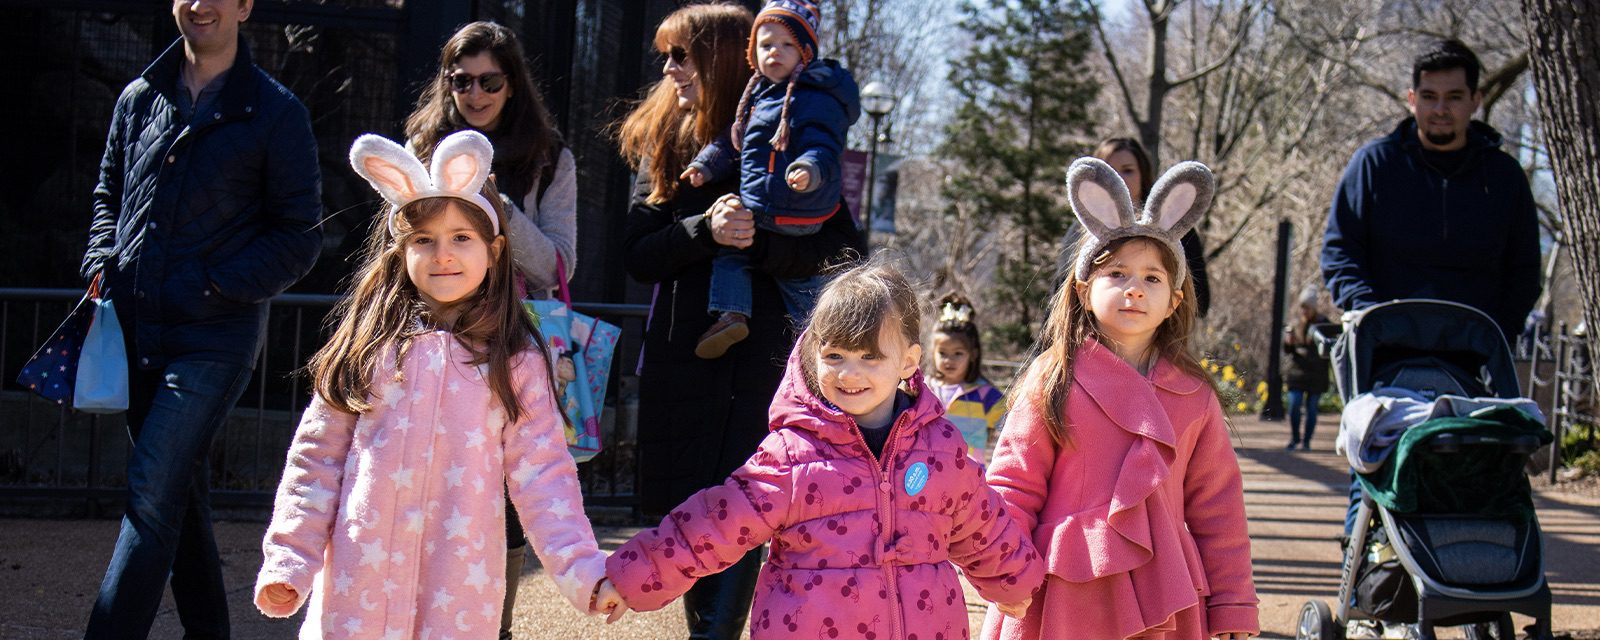 Young girls holding hands wearing bunny ear hats with parents in the background.